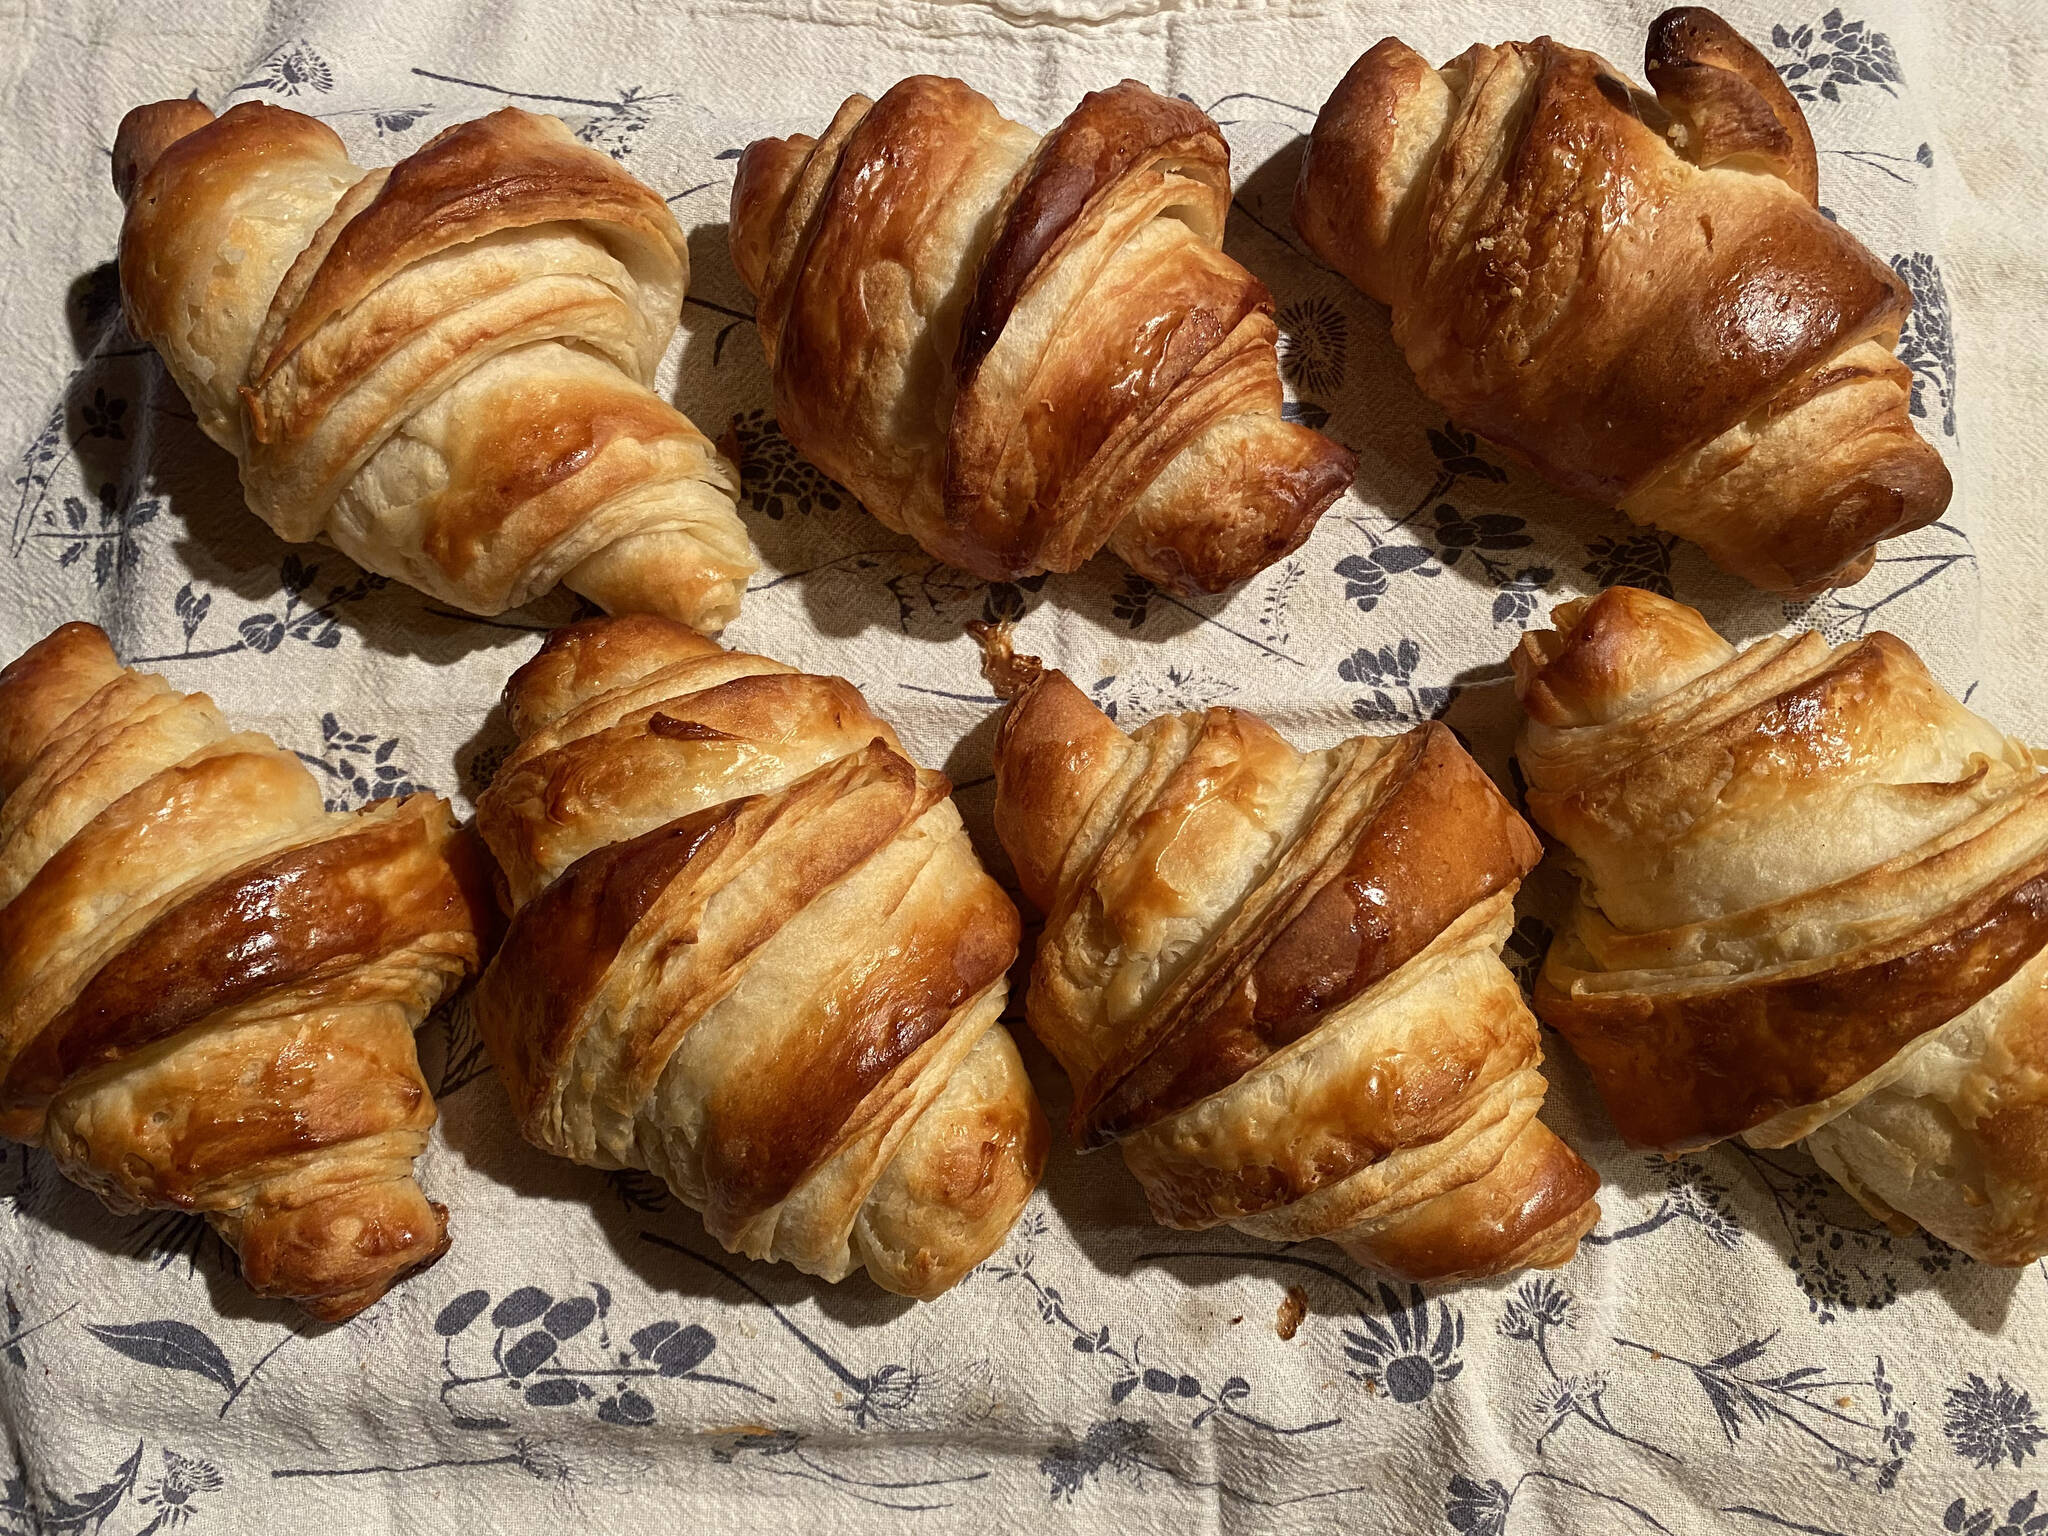 Achieving the crispy, flaky layers of golden goodness of a croissant require precision and skill. (Photo by Tresa Dale/Peninsula Clarion)